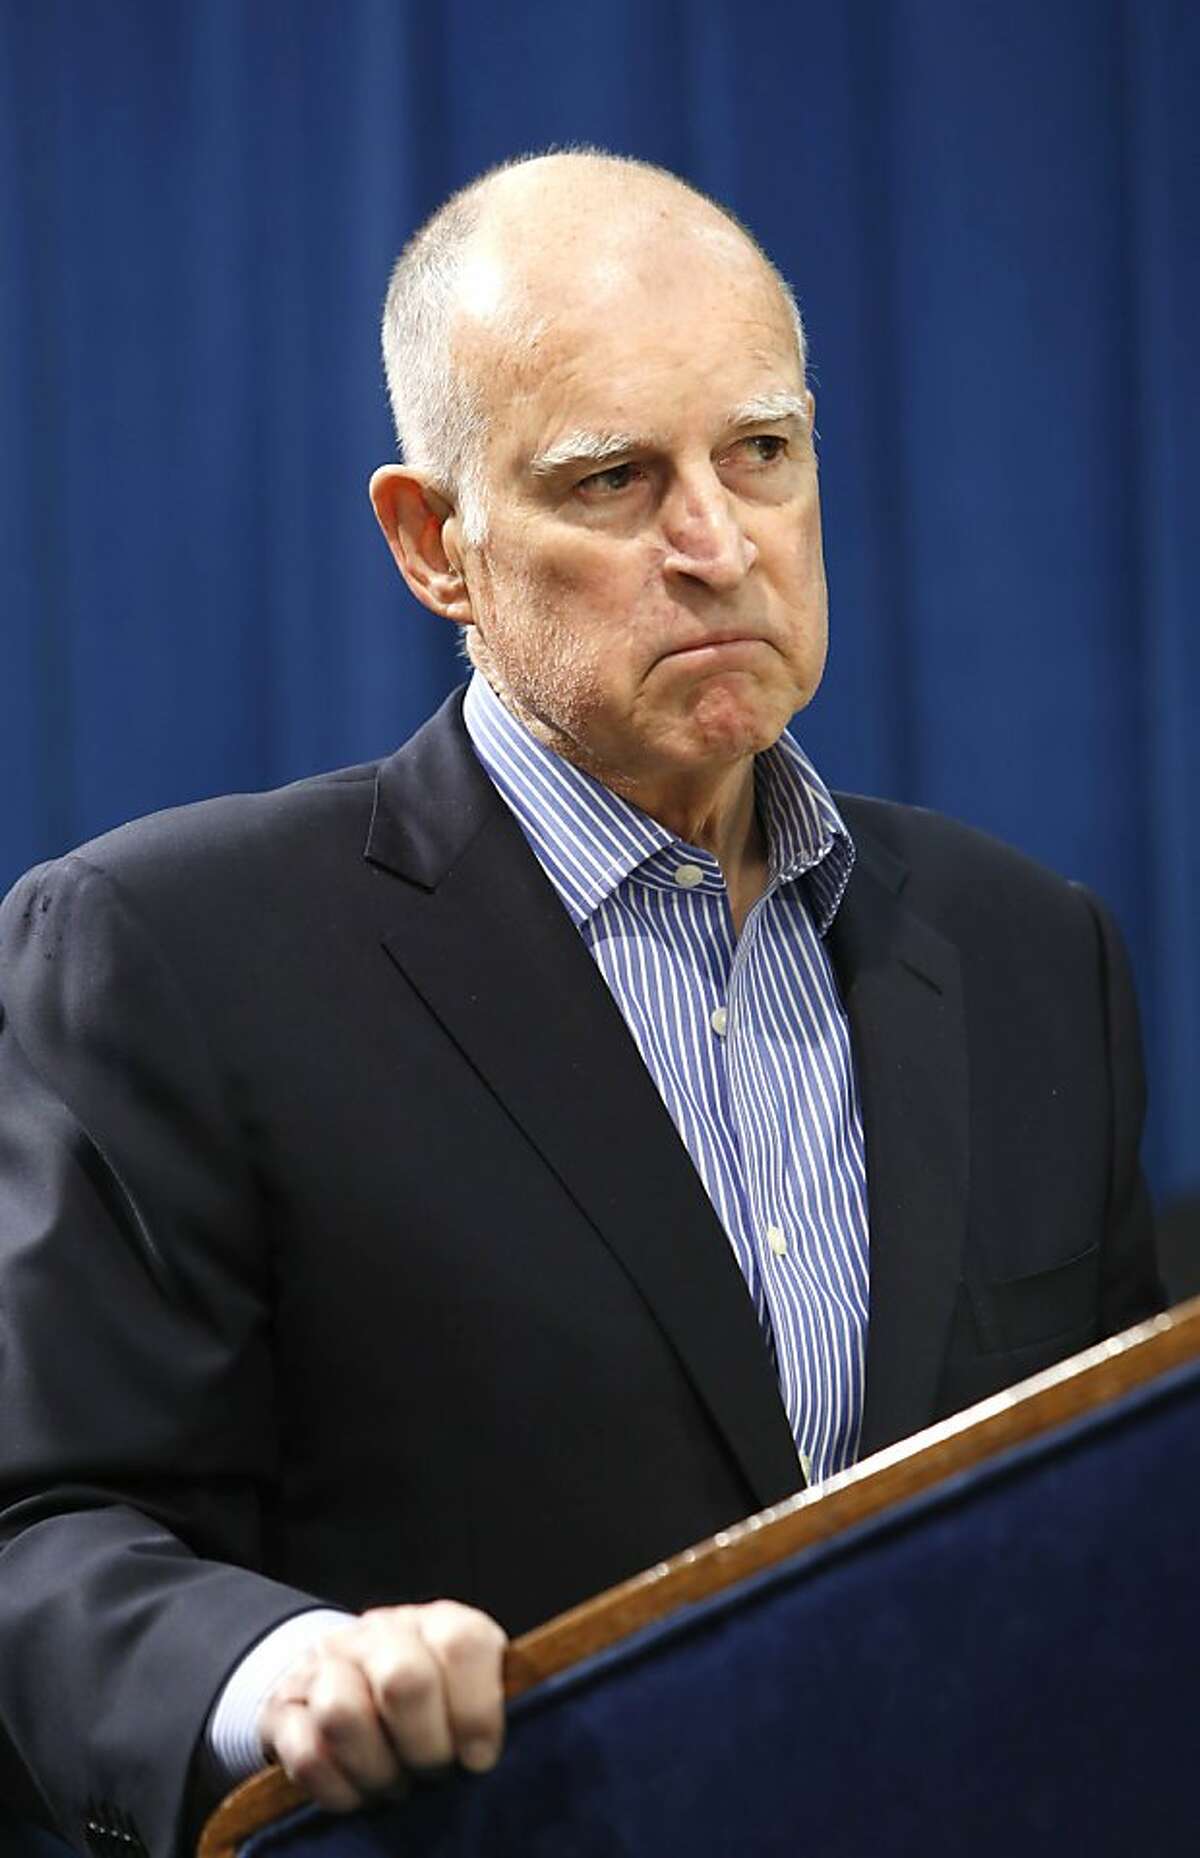 Gov. Jerry Brown ponders a questions concerning the education spending reforms included in his proposed state budget during a Capitol news conference in Sacramento, Calif., Wednesday, April 24, 2013. Brown met with a group of local school superintendents from throughout the state abut his plan to give local schools more controls of the money they receive from the state and give poorer school districts a disproportionately large share of state aid. (AP Photo/Rich Pedroncelli)